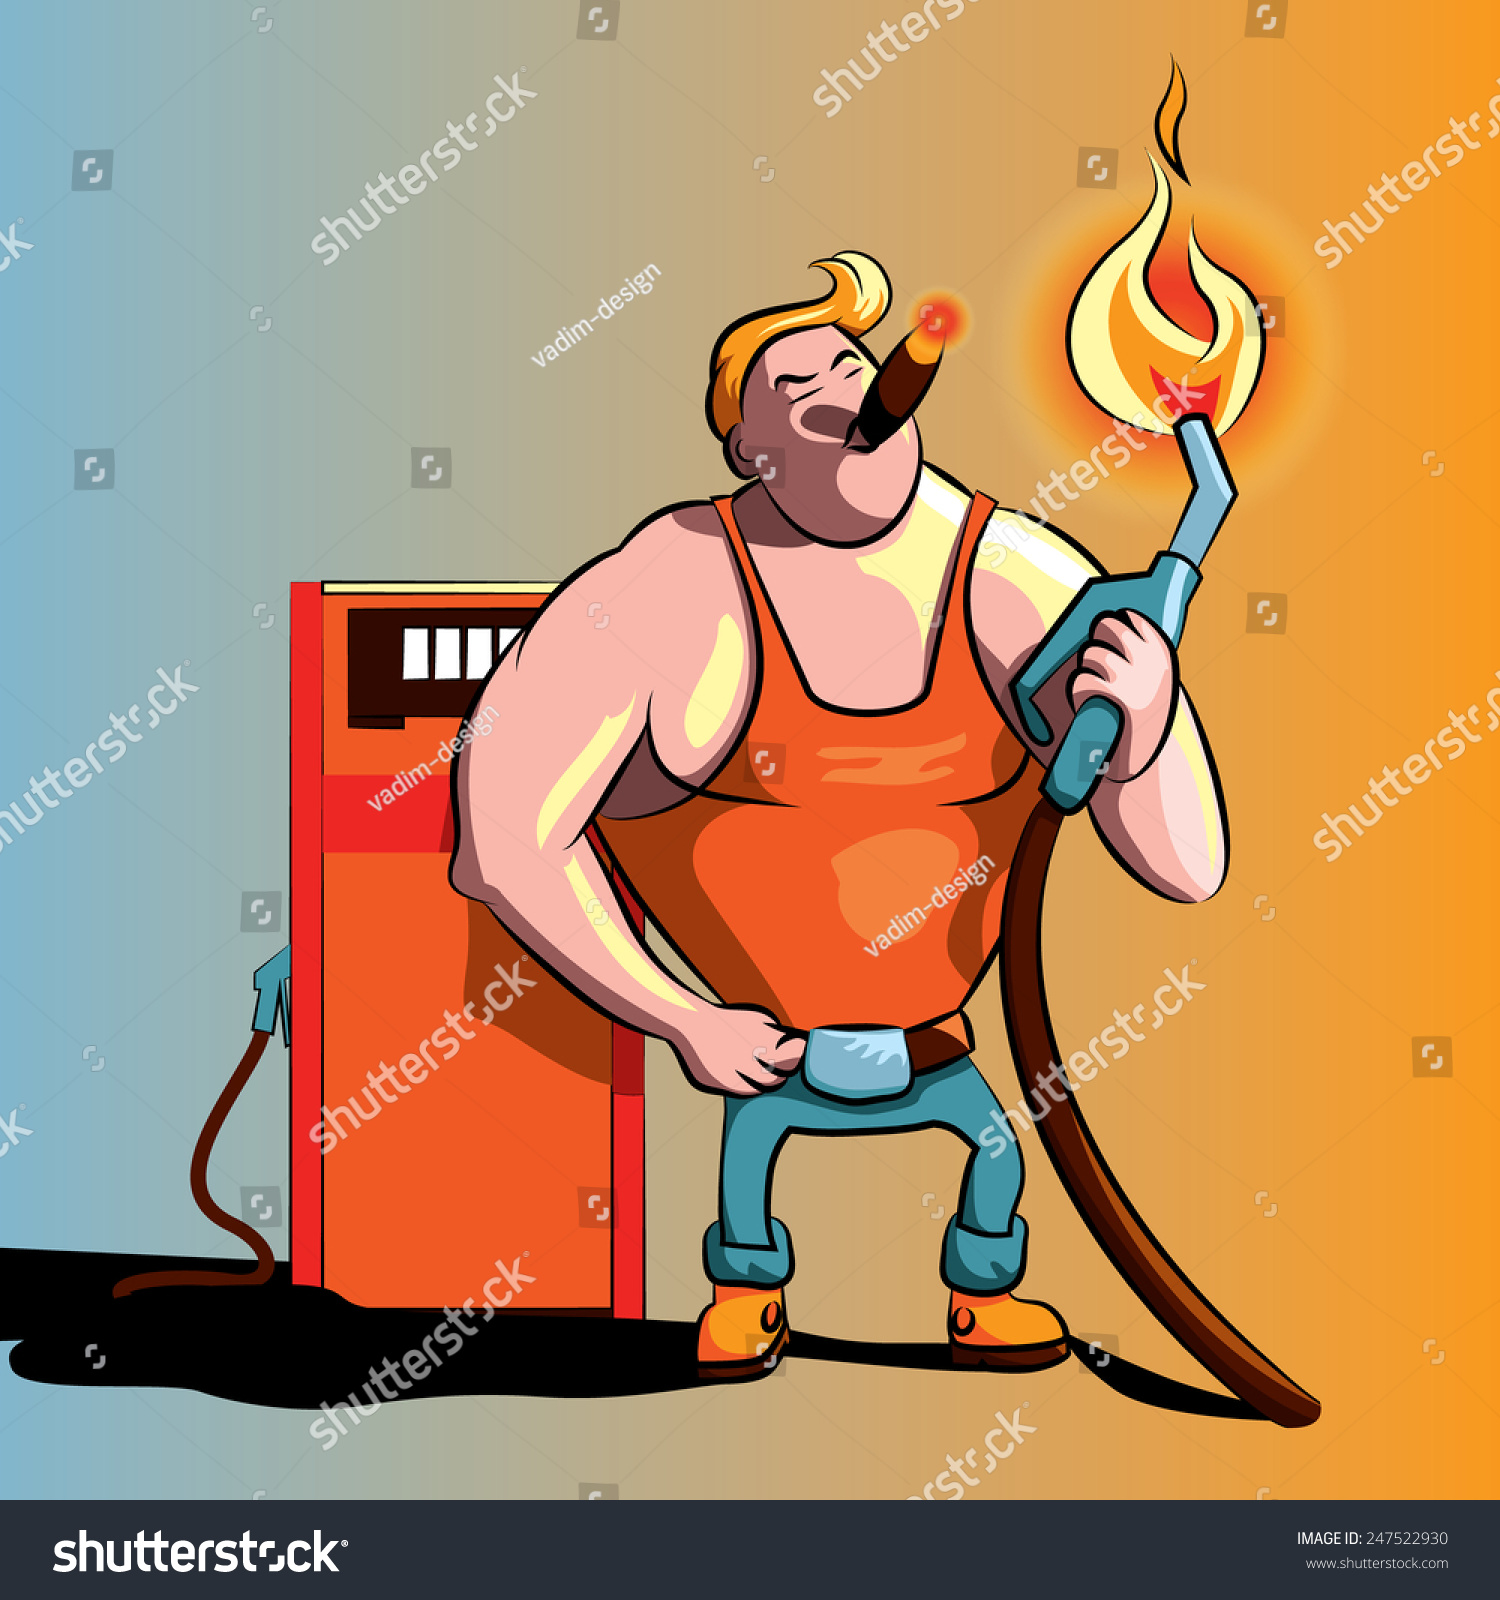 SVG of Refueling worker vector illustration, smoking a cigar on the gas station svg